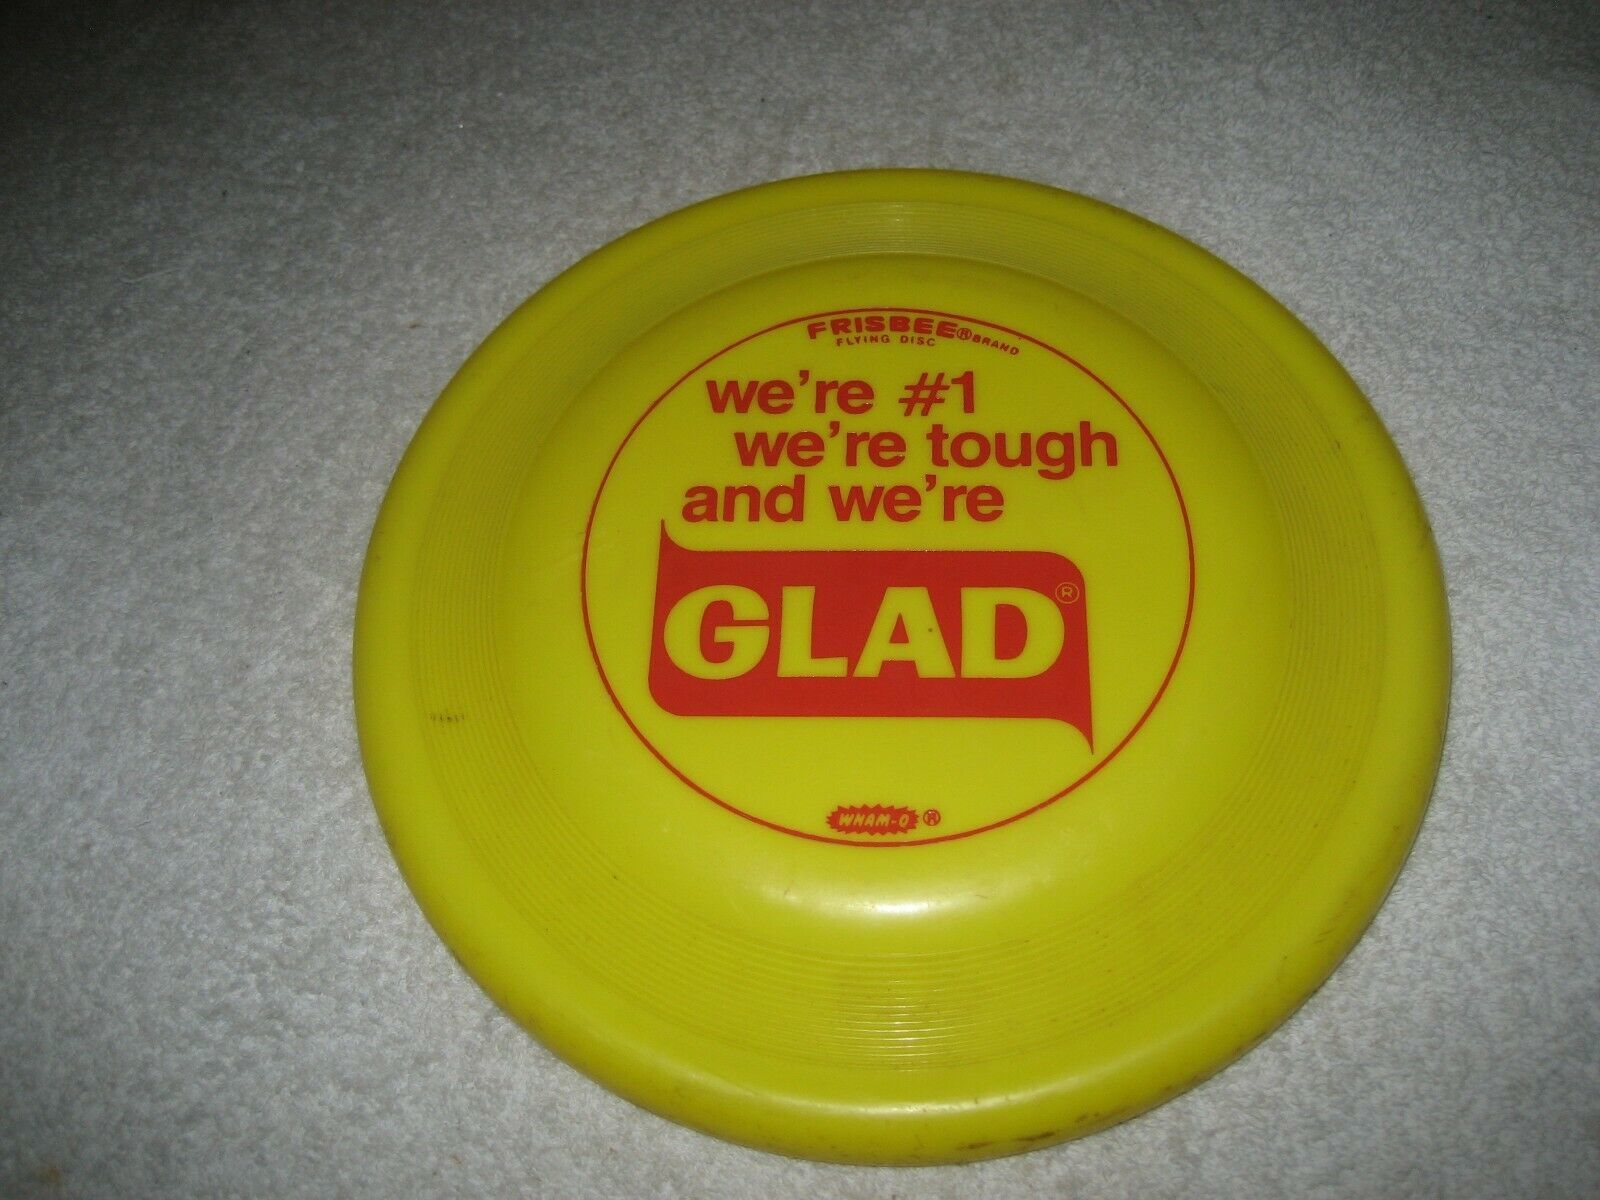  Vintage Collectible Wham-O GLAD Bags Frisbee - $19.79